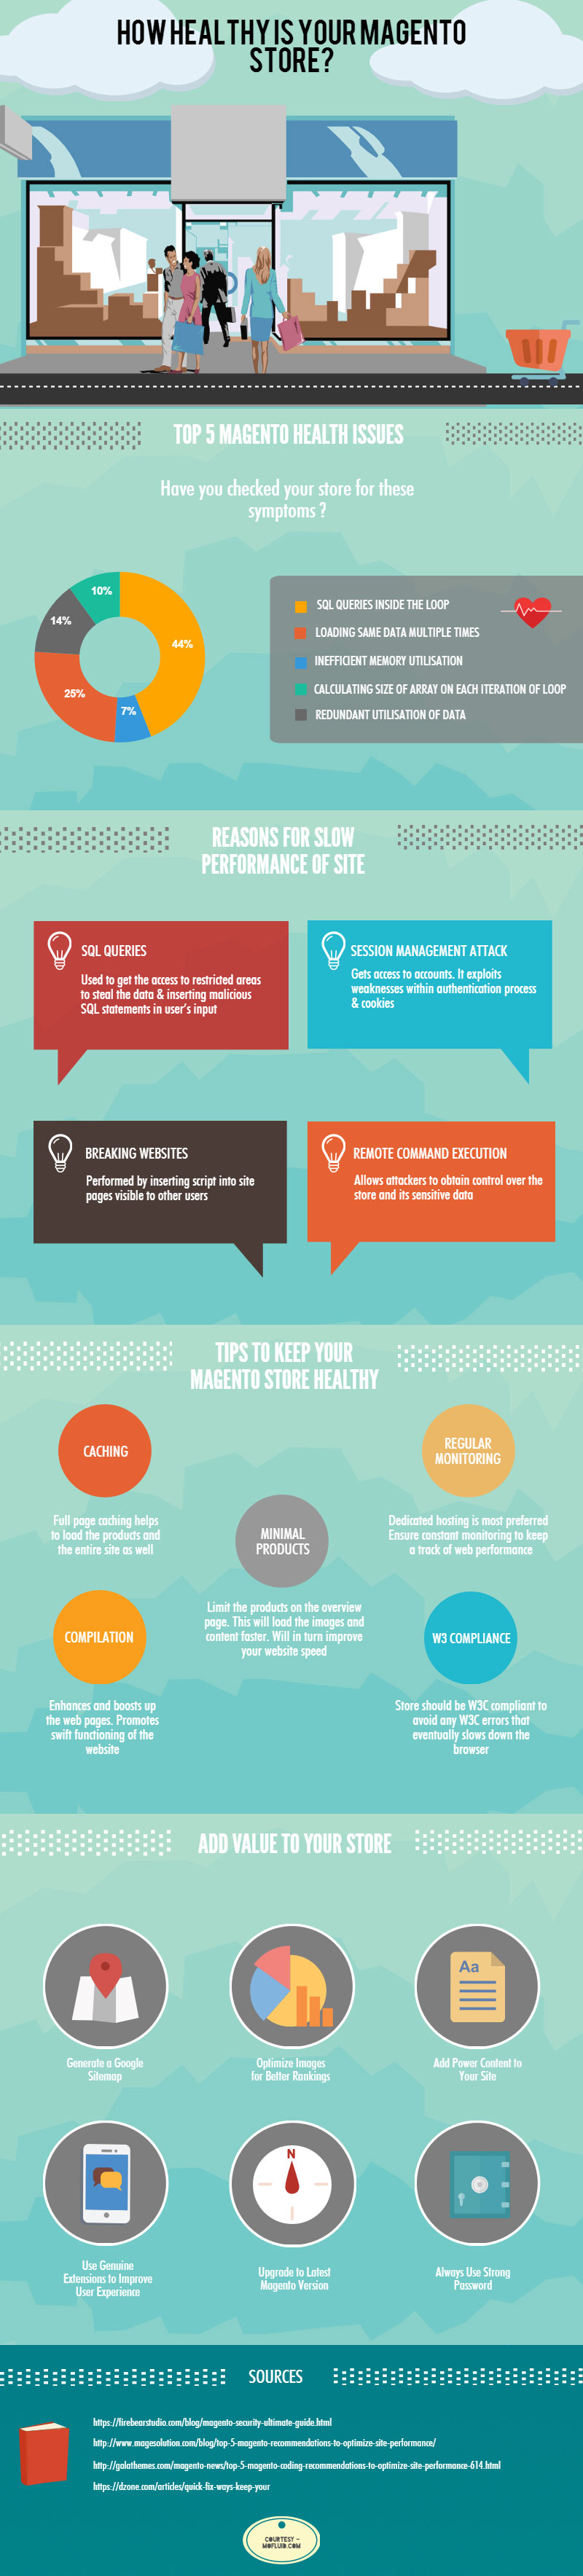 How Healthy is Your Magento Store? (Infographic)